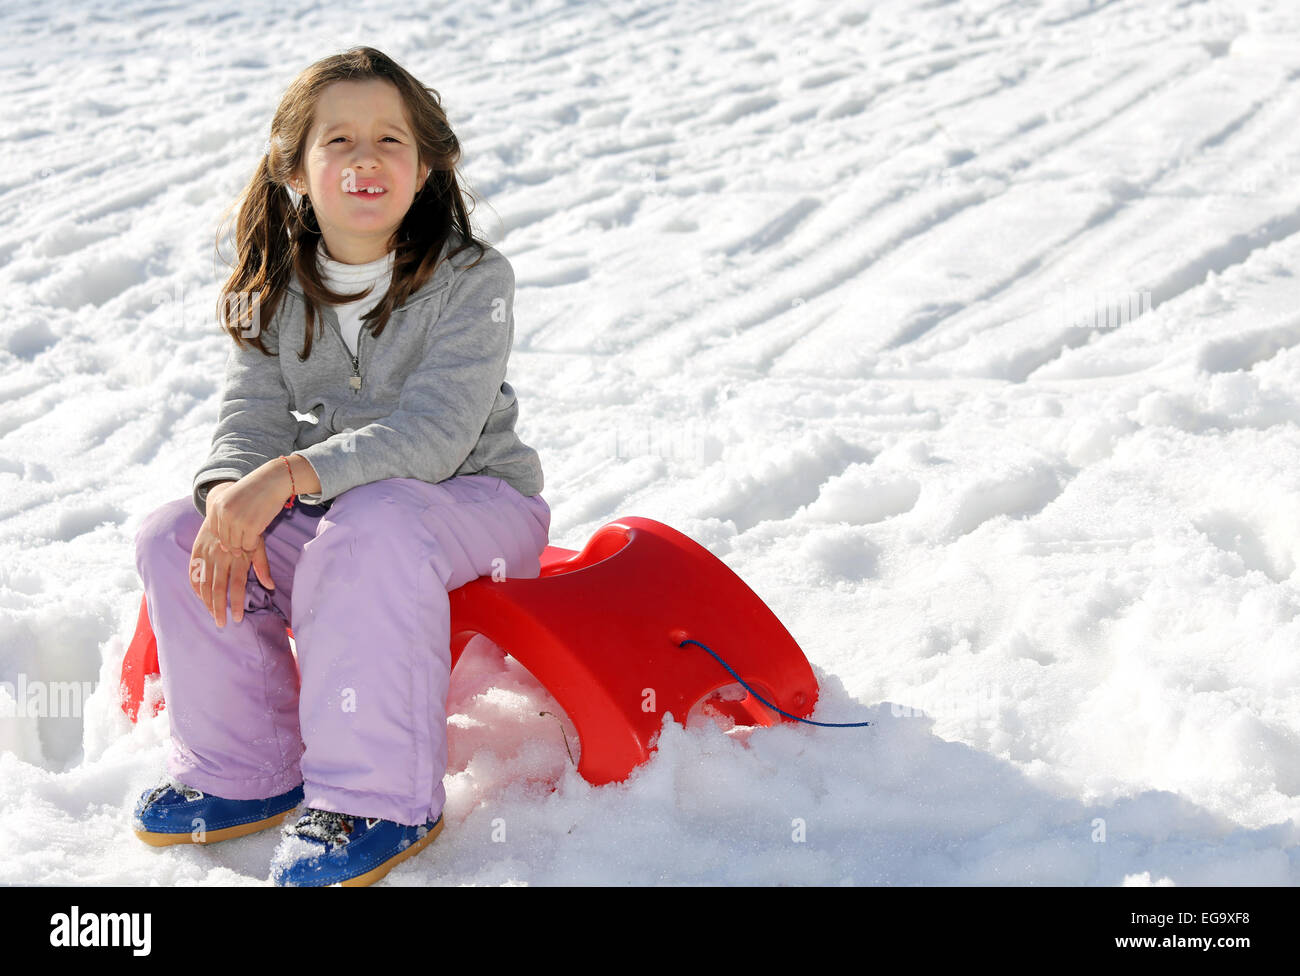 pretty girl plays with the Red sled on the snow in the winter in the mountains Stock Photo